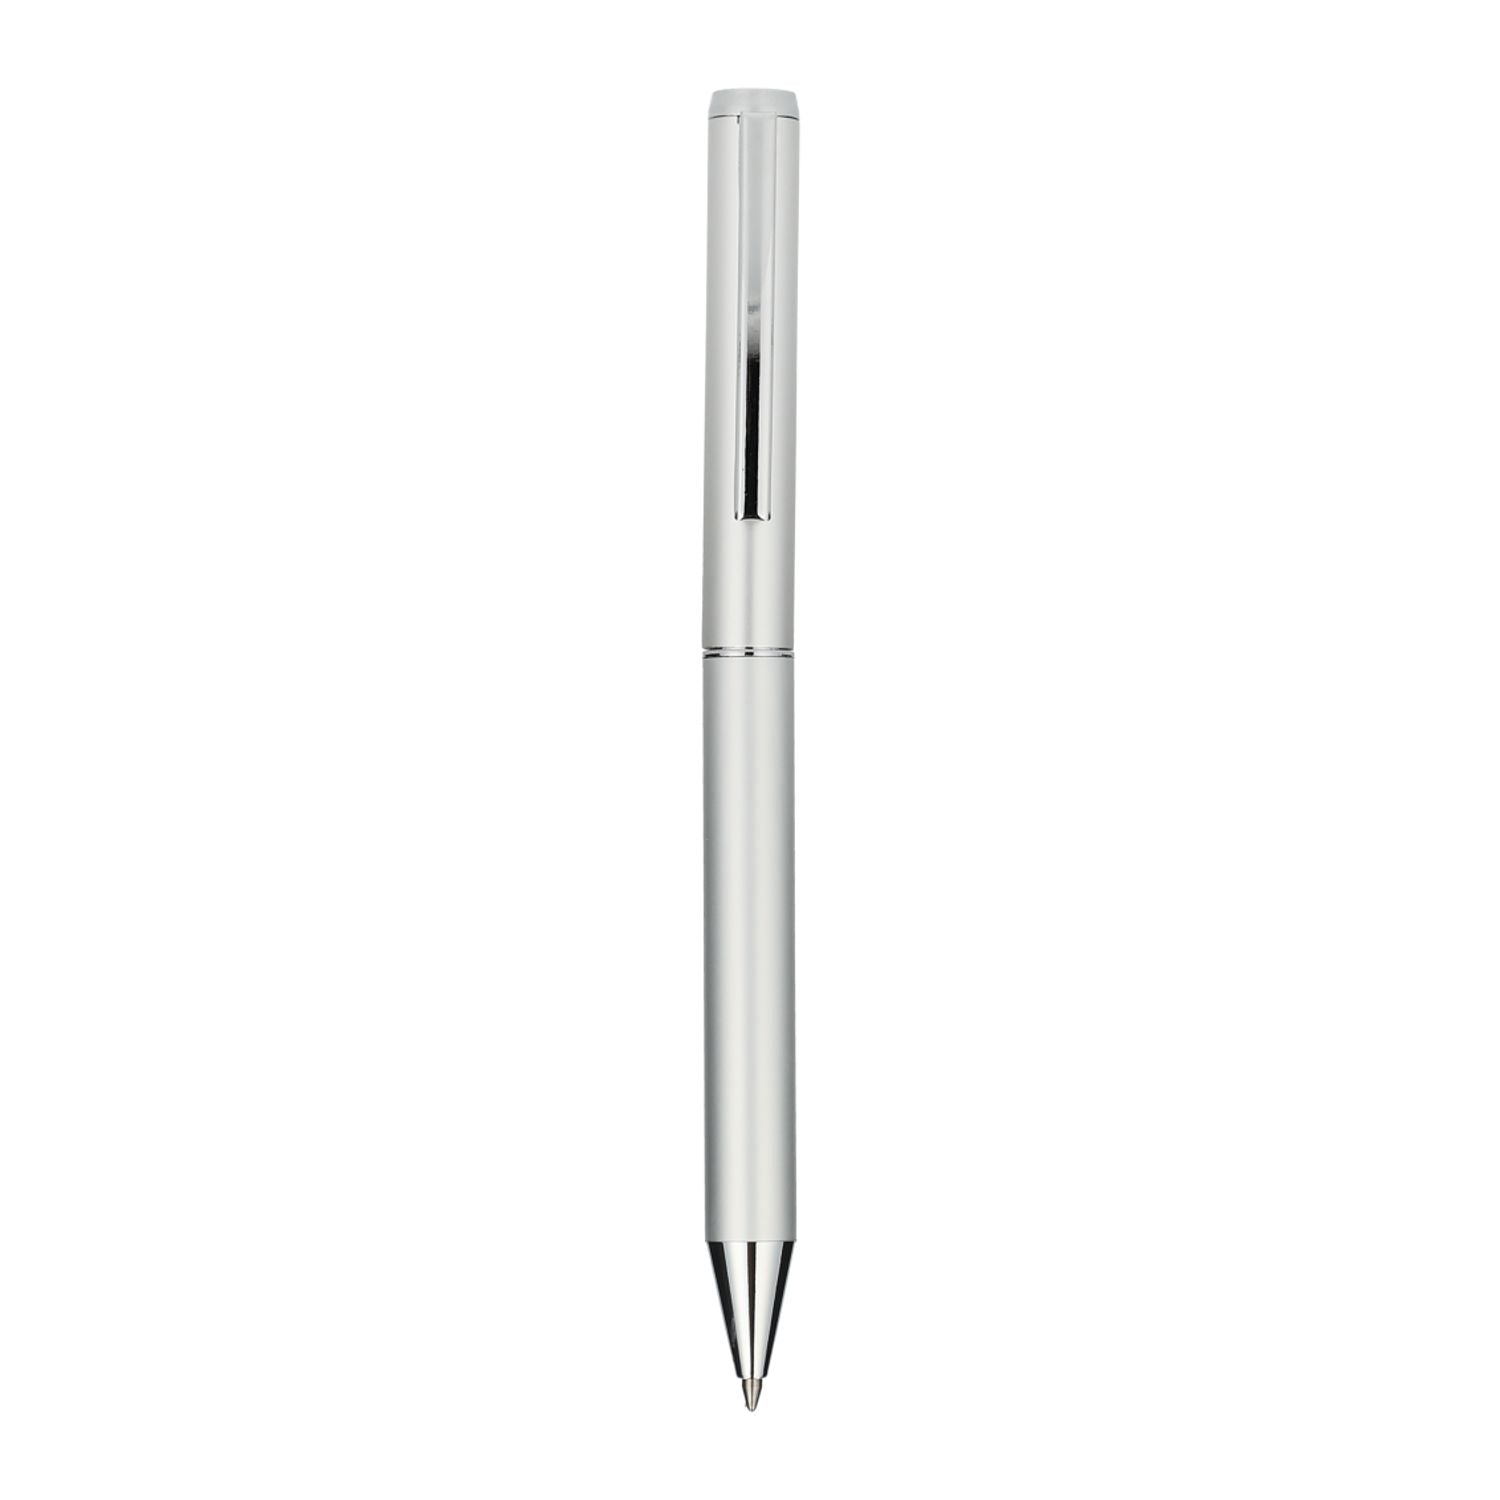 Customized recycled aluminum ultra gel ballpoint pen in silver.